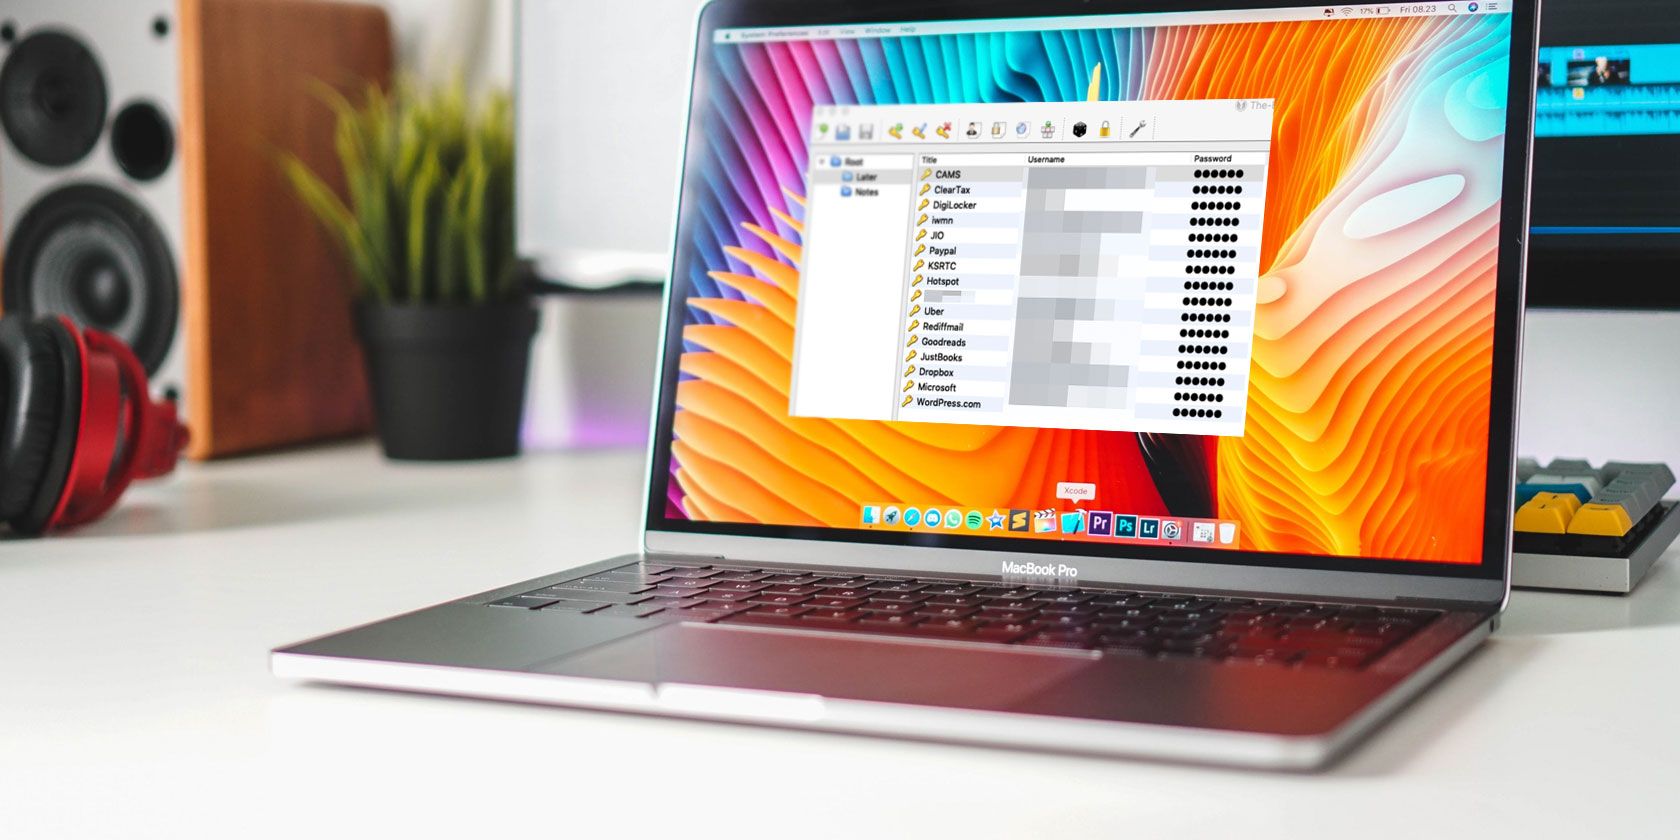 best password manager 2017 for mac